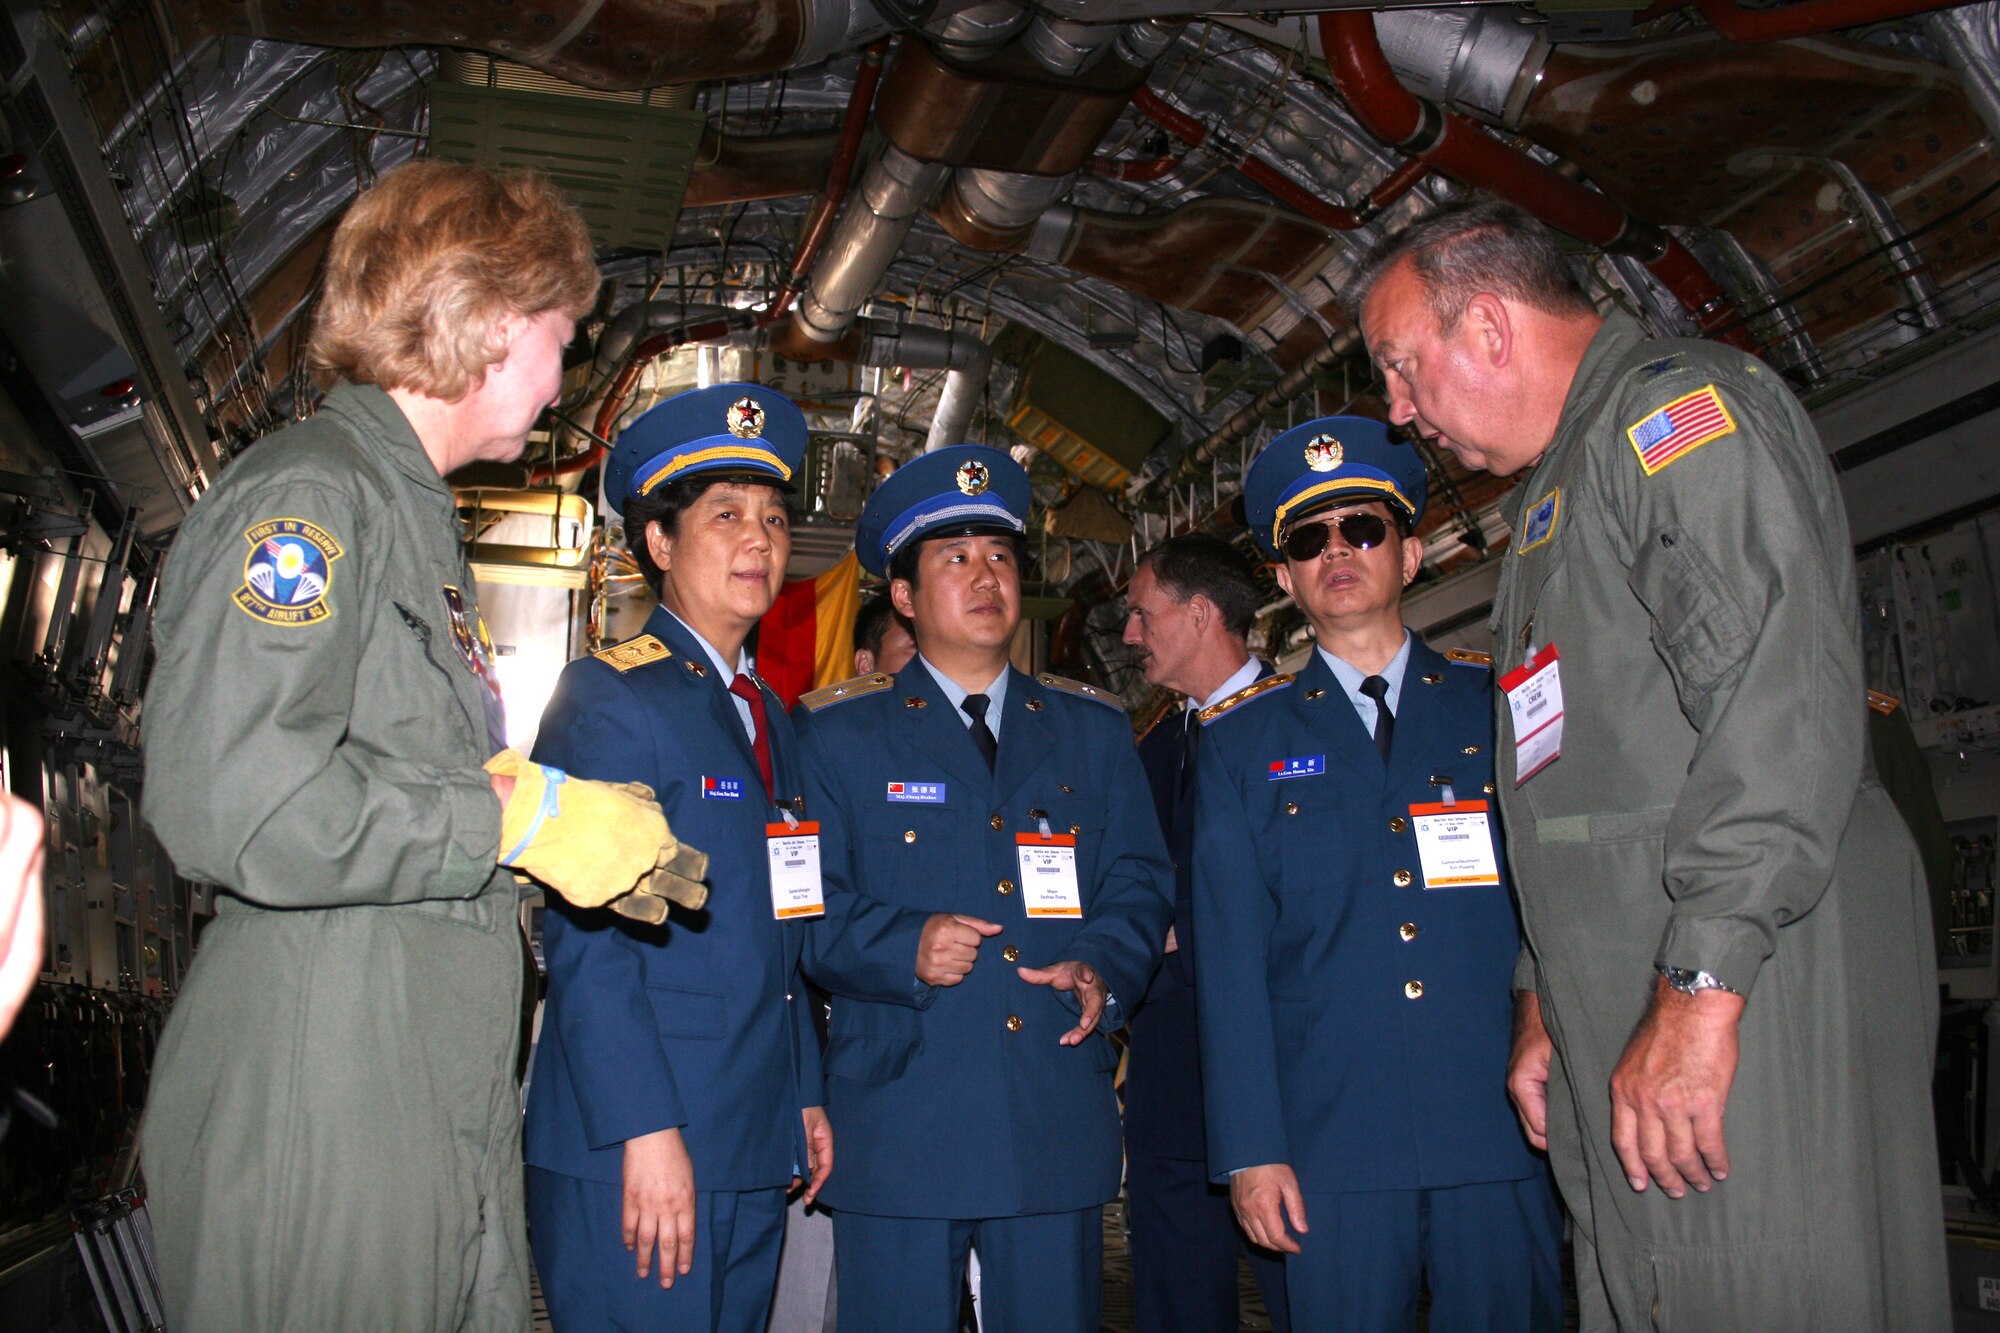 BERLIN, Germany - Chief Master Sgt. Evelyn Irwin and Col. Gary Cook, both from the 315th Airlift Wing at Charleston Air Force Base, S.C., discuss the C-17's cargo load capabilities with members of a Chinese delegation visiting the Berlin Air Show May 16. The Chinese delegation included, from left, Maj. Gen. Yue Xicui, Lt. Gen. Huang Xin, and Maj. Zhang Dezhao. Xicui is the Chinese Air Force's first female pilot and has more than 6,000 flying hours. The Chinese delegation also visited the B-1 Lancer and C-130J Hercules aircraft. Various models of U.S. military aircraft and about 60 support personnel from bases in Europe and the United States are attending the air show at Berlin-Schoenefeld Airport May 16-21. The Berlin Air Show is one of the premier events of its type in the world, and U.S. military participation contributes to a number of U.S. security and foreign policy interests. Participation promotes standardization and interoperability of equipment with our NATO allies and other potential coalition partners, highlights the strength of the U.S. commitment to the security of Europe and demonstrates that U.S. industry is producing equipment that will be critical to the success of current and future military operations.  (Photo by Maj. Pamela A.Q. Cook, USAF)
